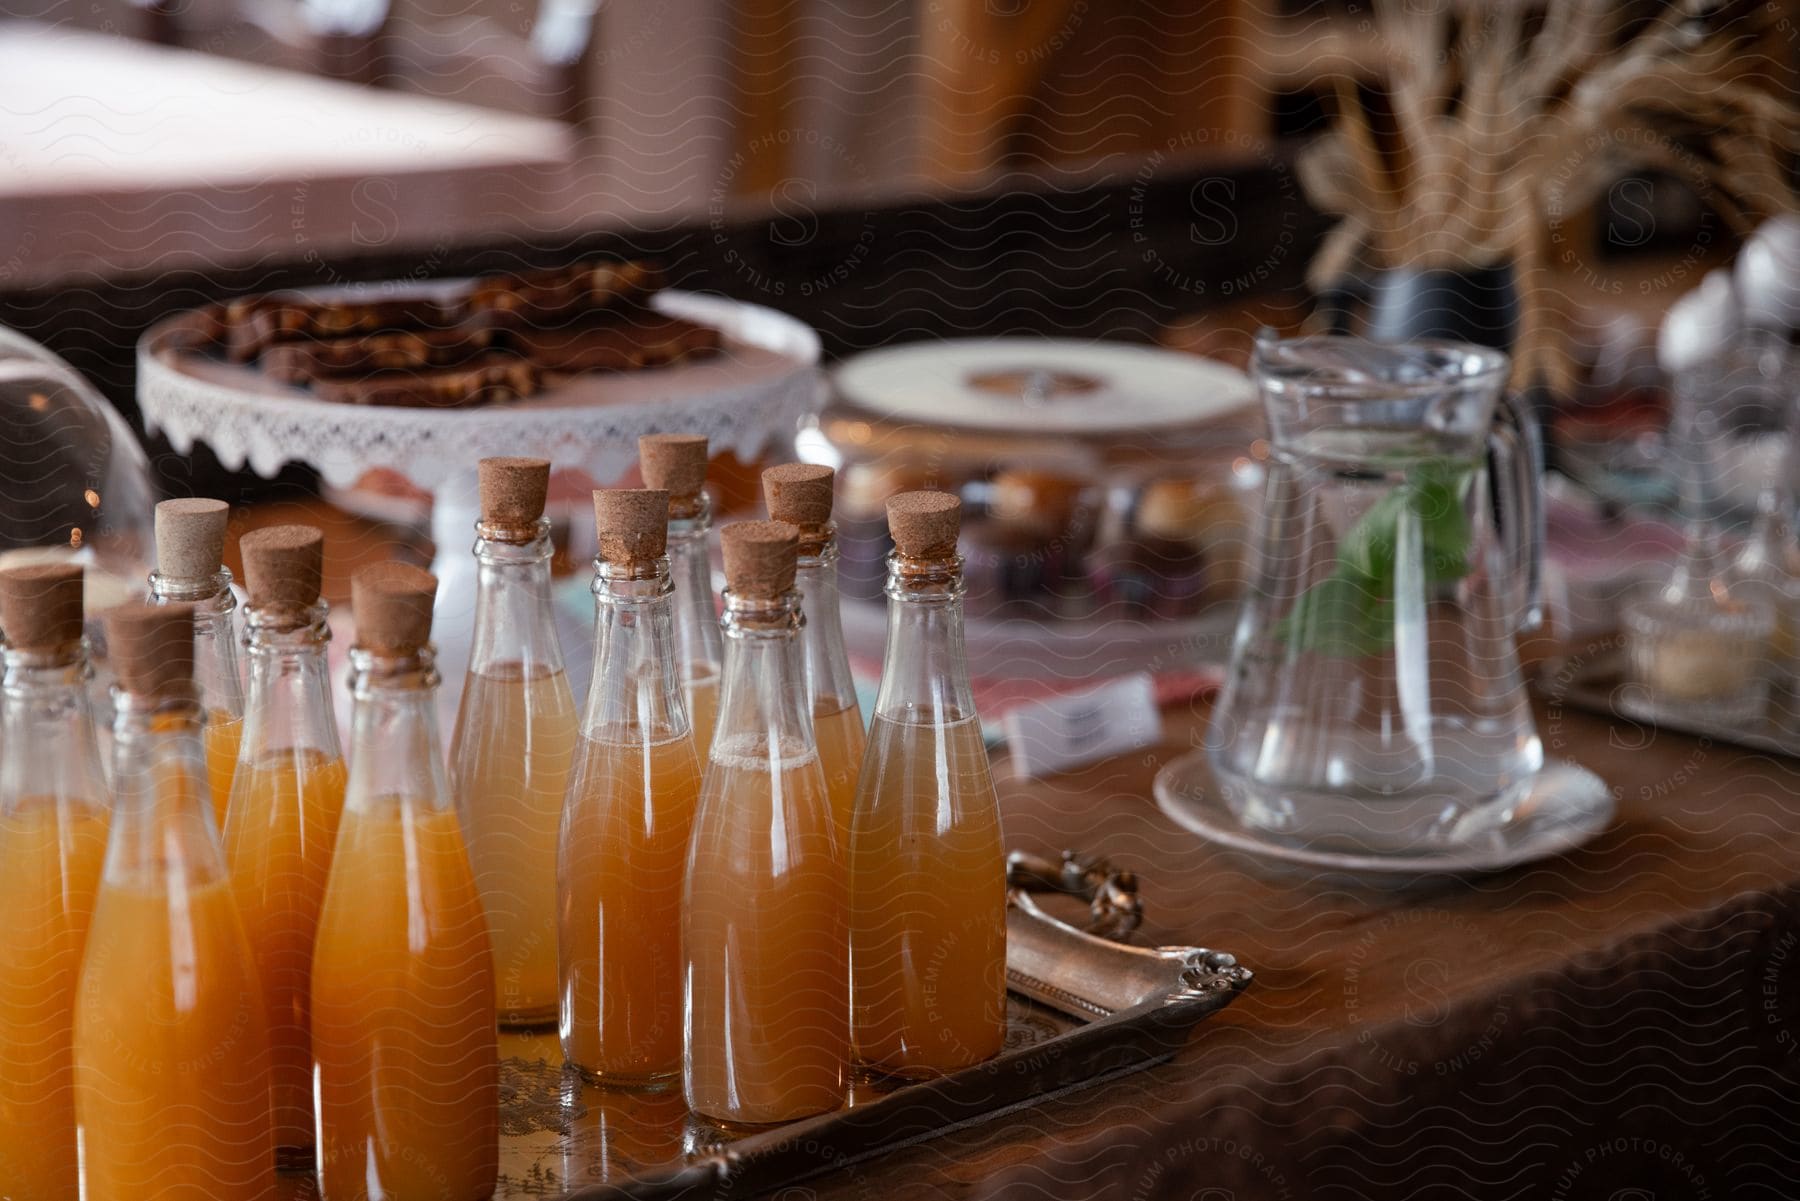 Rows of bottled orange beverages on a tray, with dessert trays and a water jug with fresh mint inside in the background, on a wooden table.